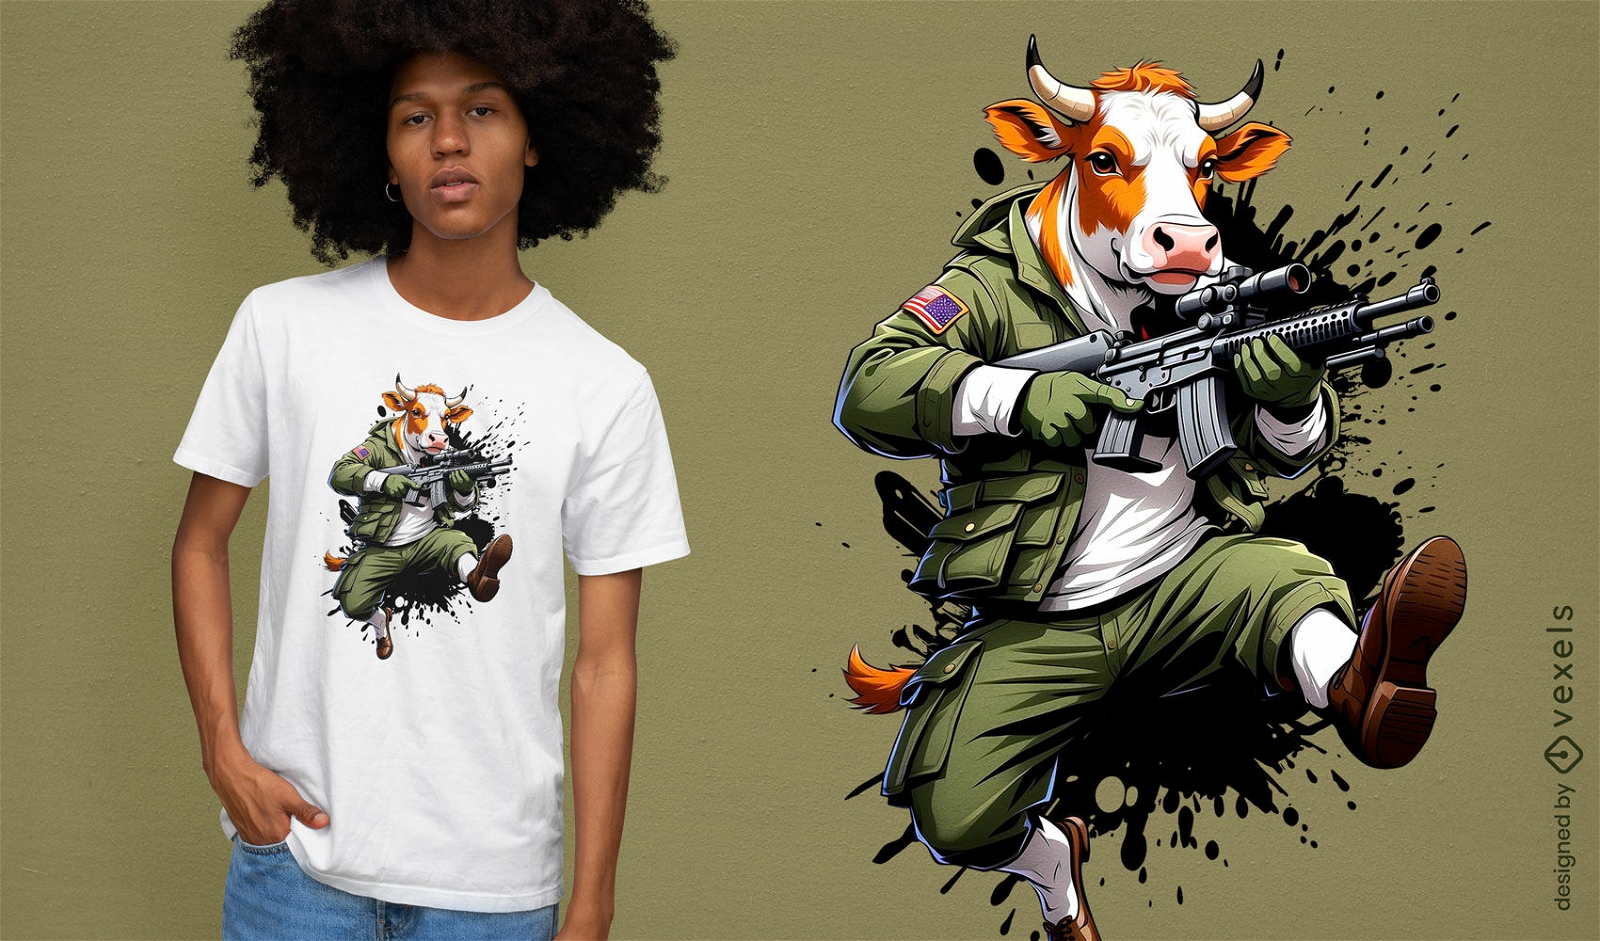 Armed cow character t-shirt design